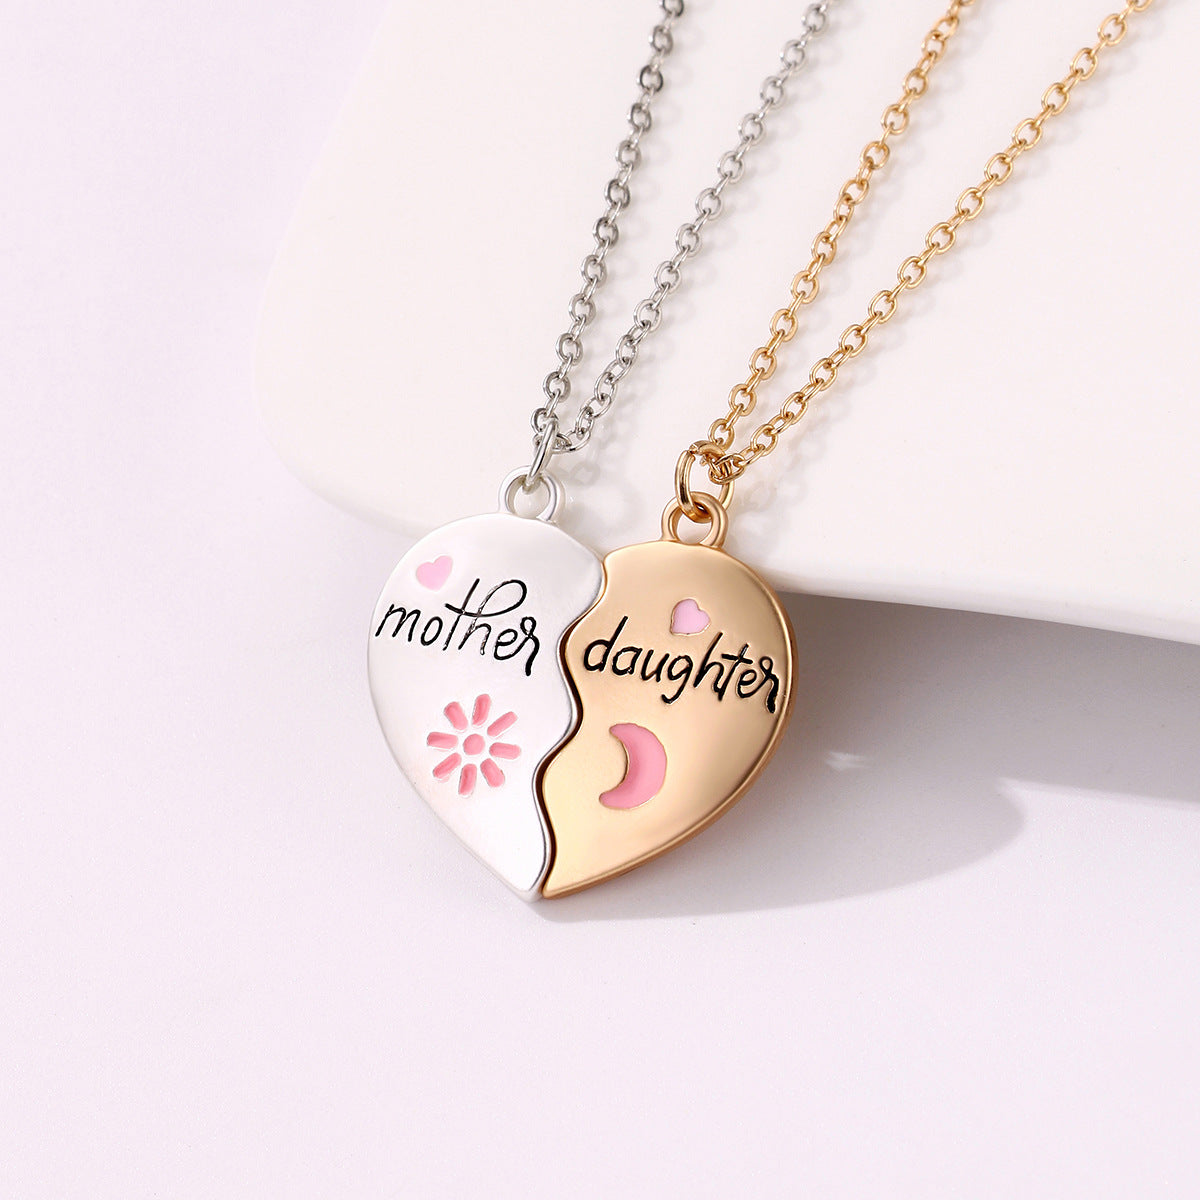 2PCS Set Jewelry Mother Daughter Necklace Matching Heart Magnetic Pendant Fashion Gifts For Mother's Day